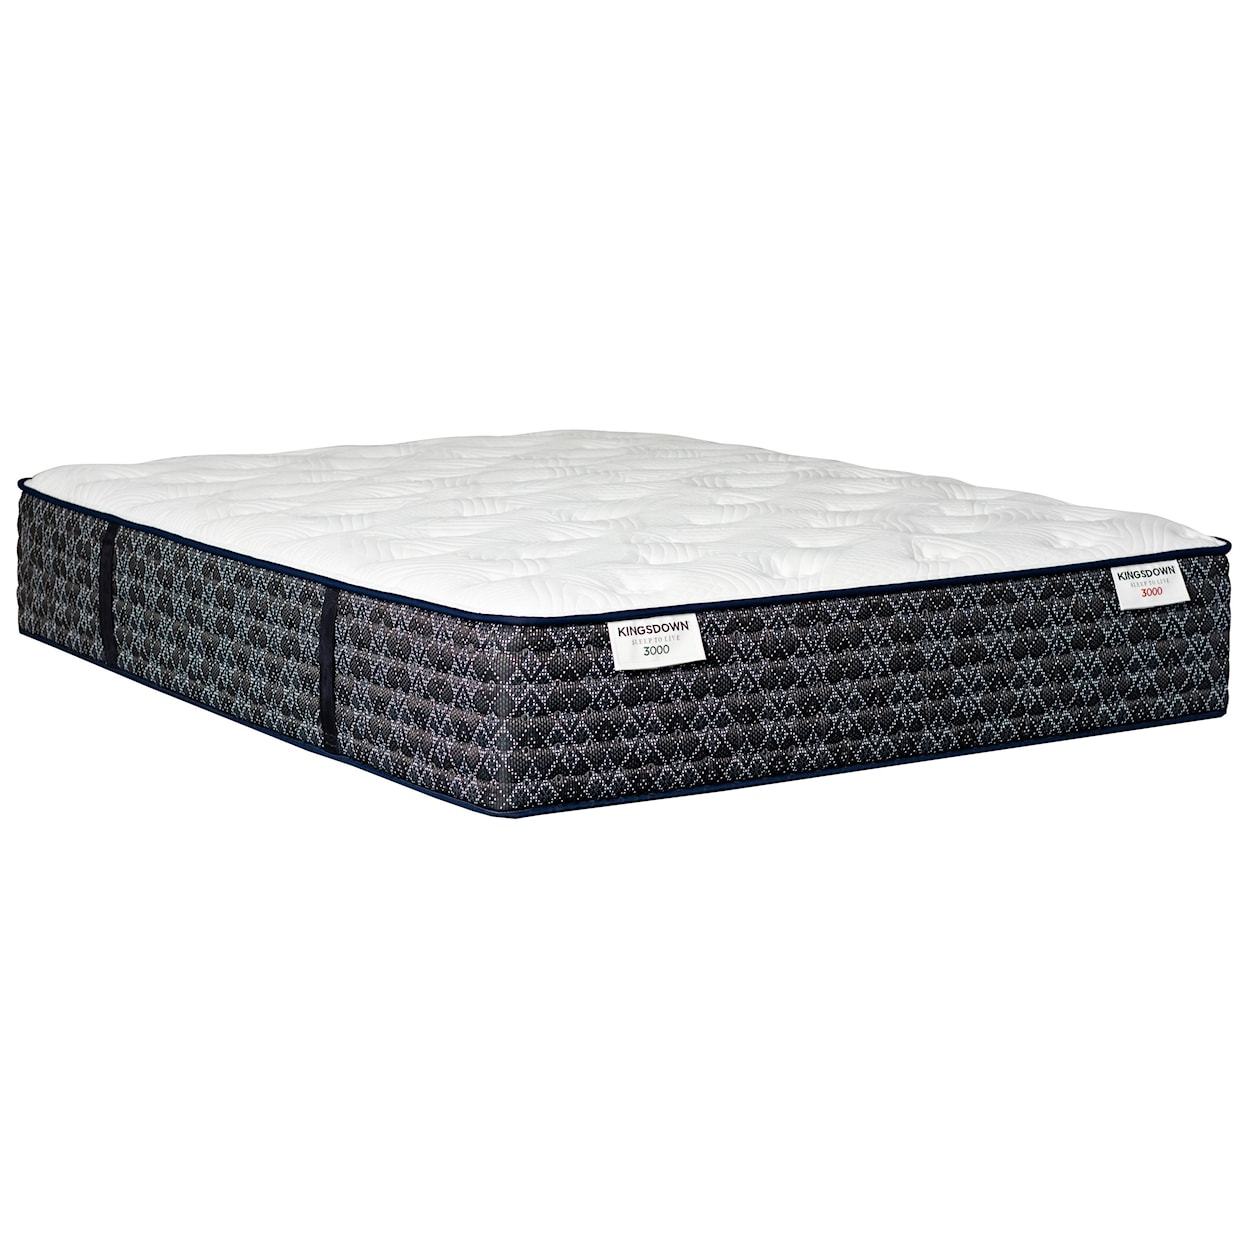 Kingsdown Sleep to Live 3000 Green Red Twin Pocketed Coil Mattress